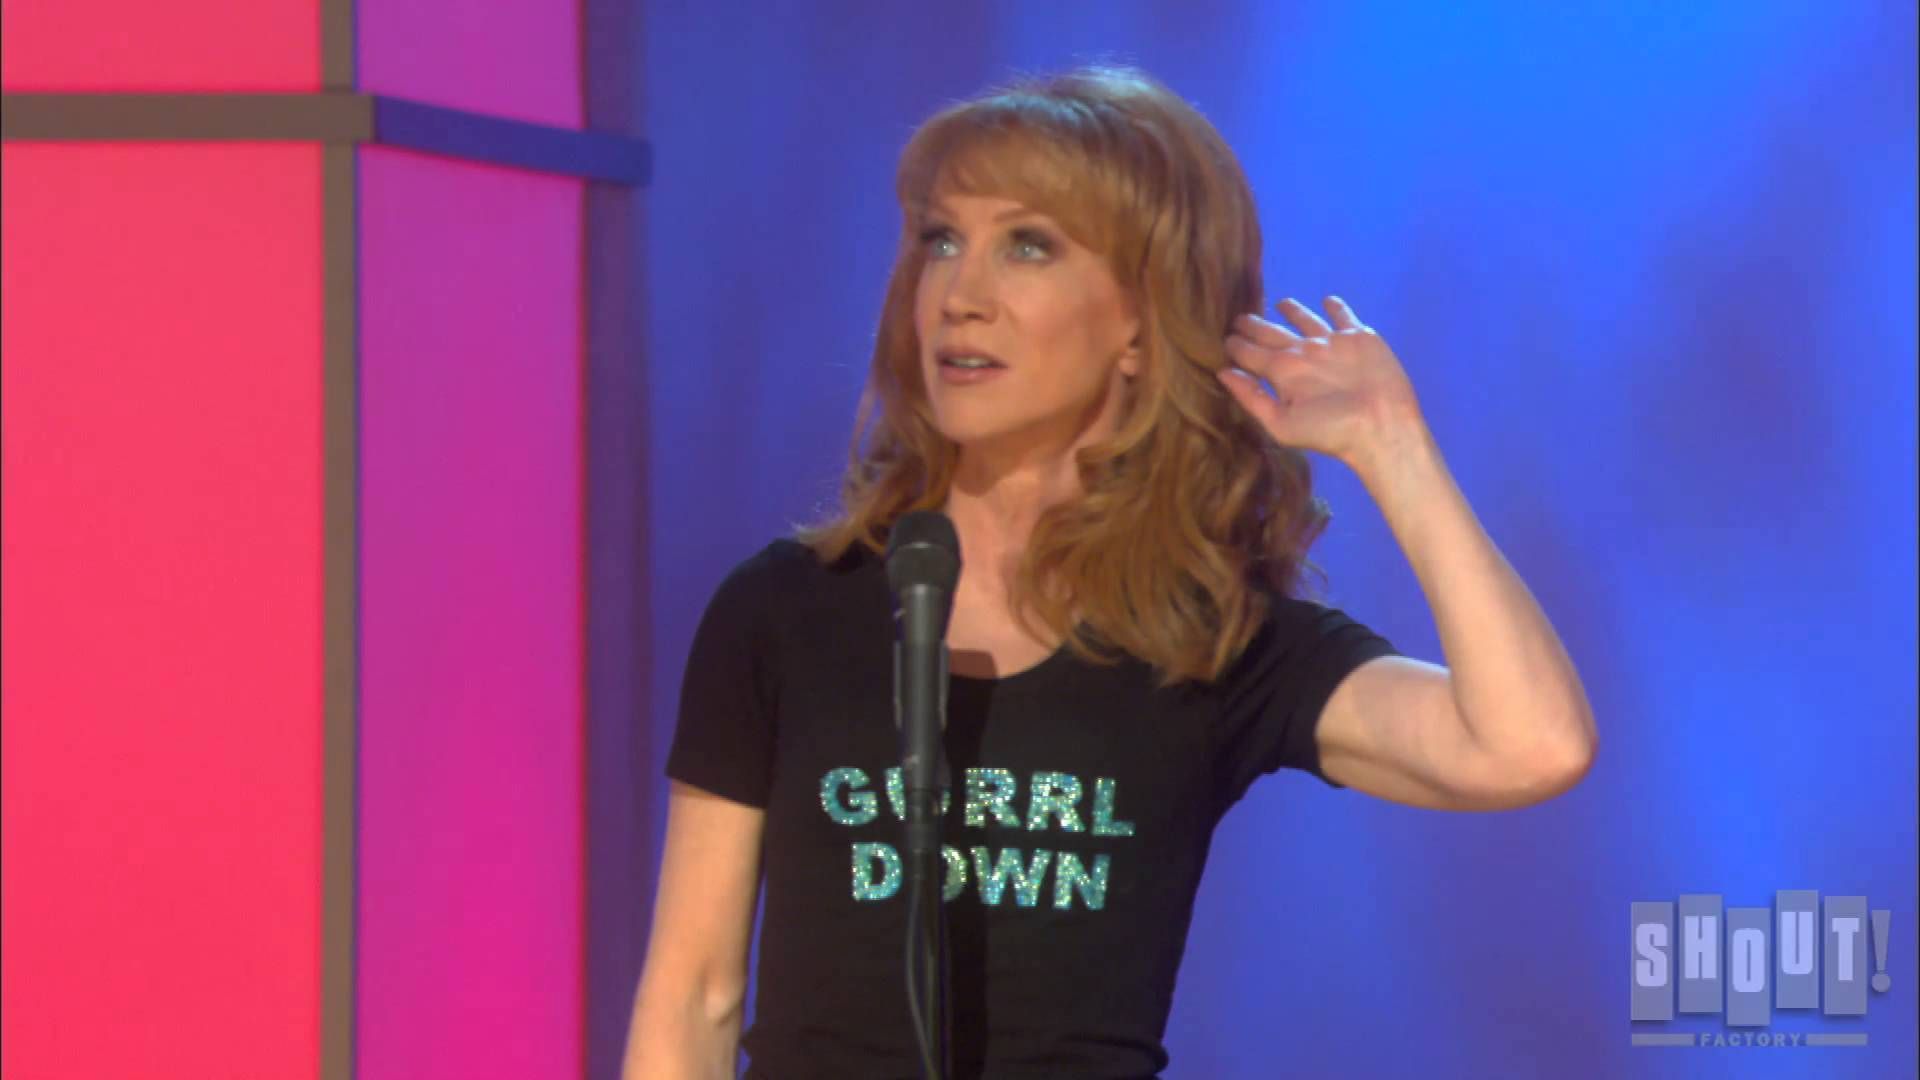 Kathy Griffin: Everybody Can Suck It Backdrop